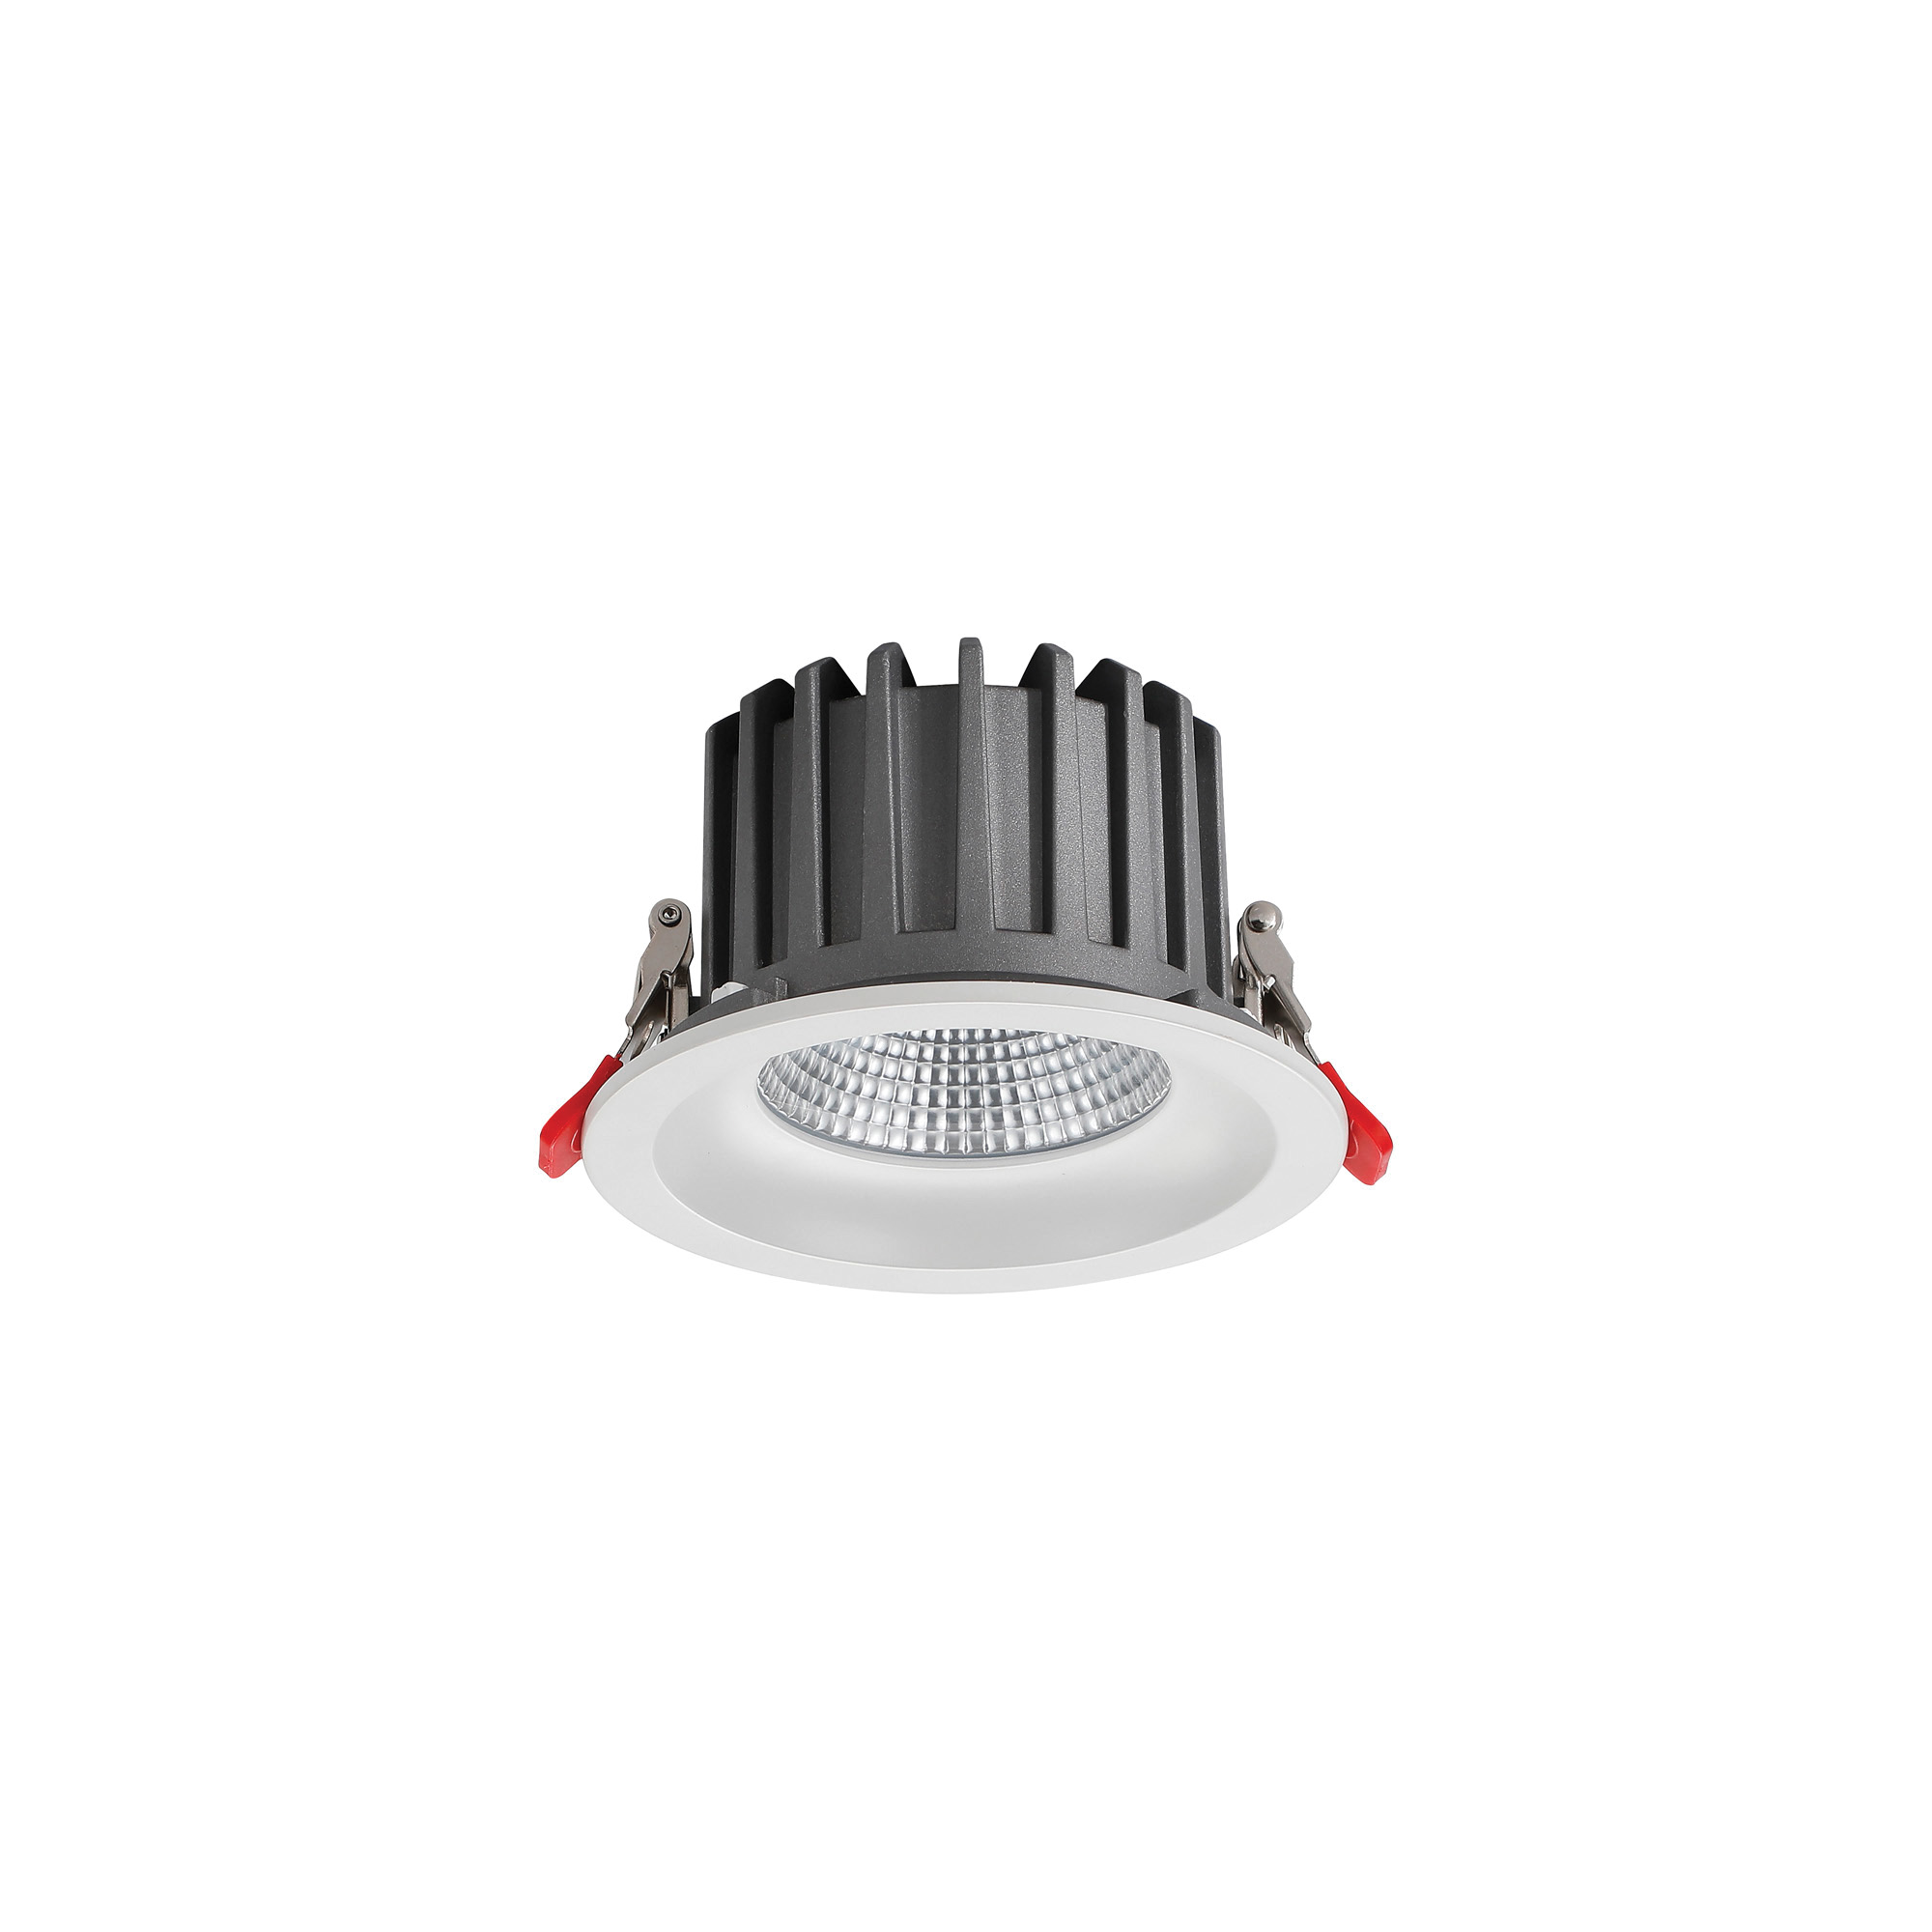 DL200056  Bionic 15, 15W, 350mA, White Deep Round Recessed Downlight, 1178lm ,Cut Out 120mm, 40° , 4000K, IP44, DRIVER INC., 5yrs Warranty.